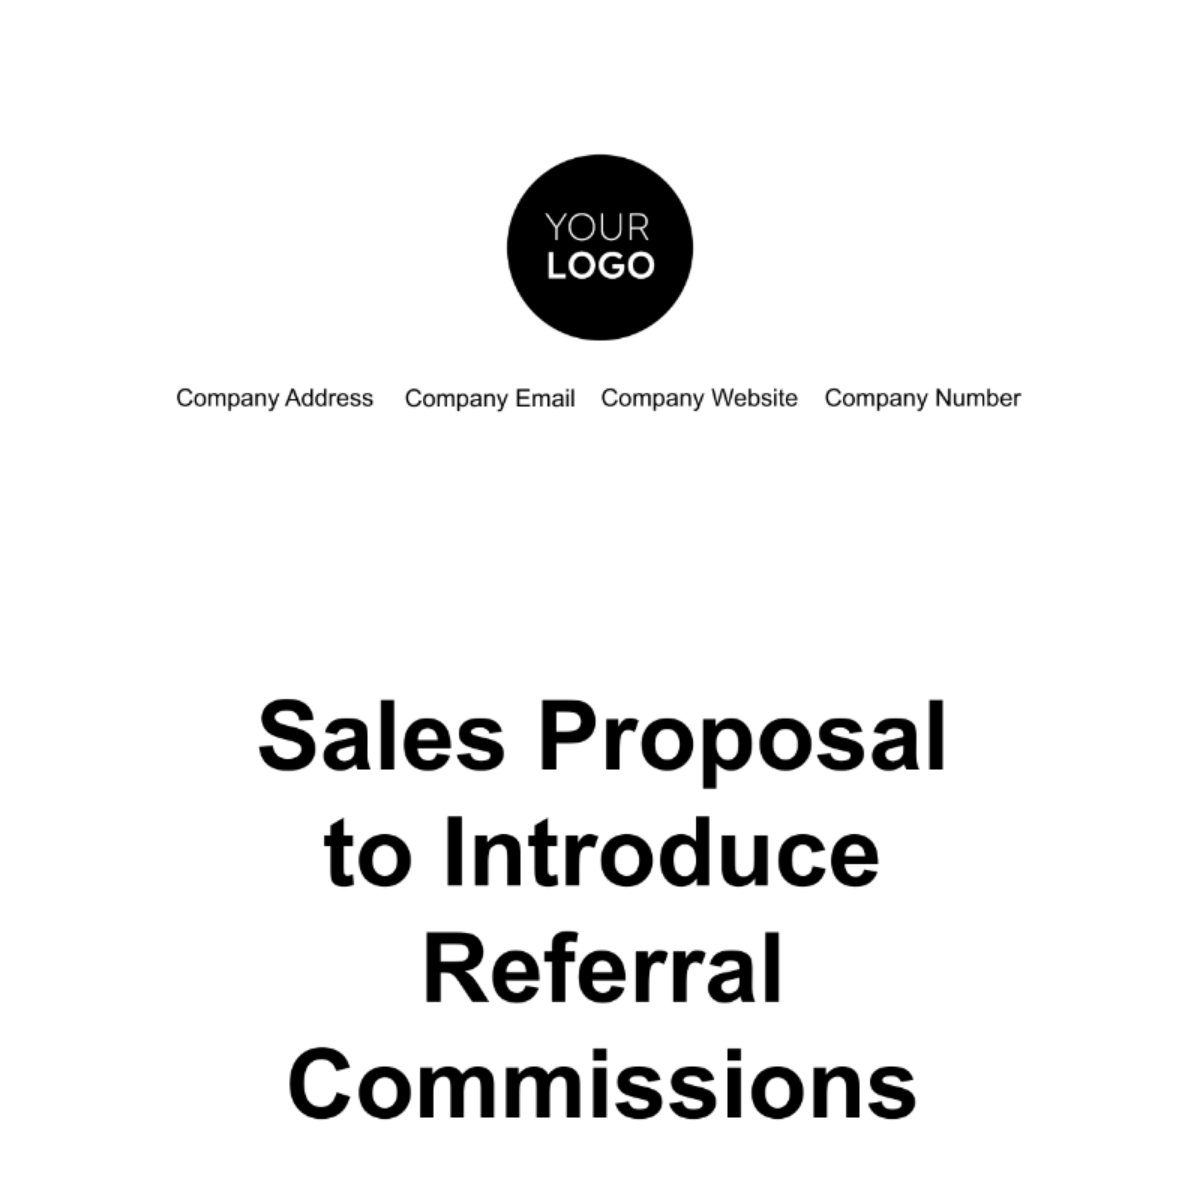 Sales Proposal to Introduce Referral Commissions Template